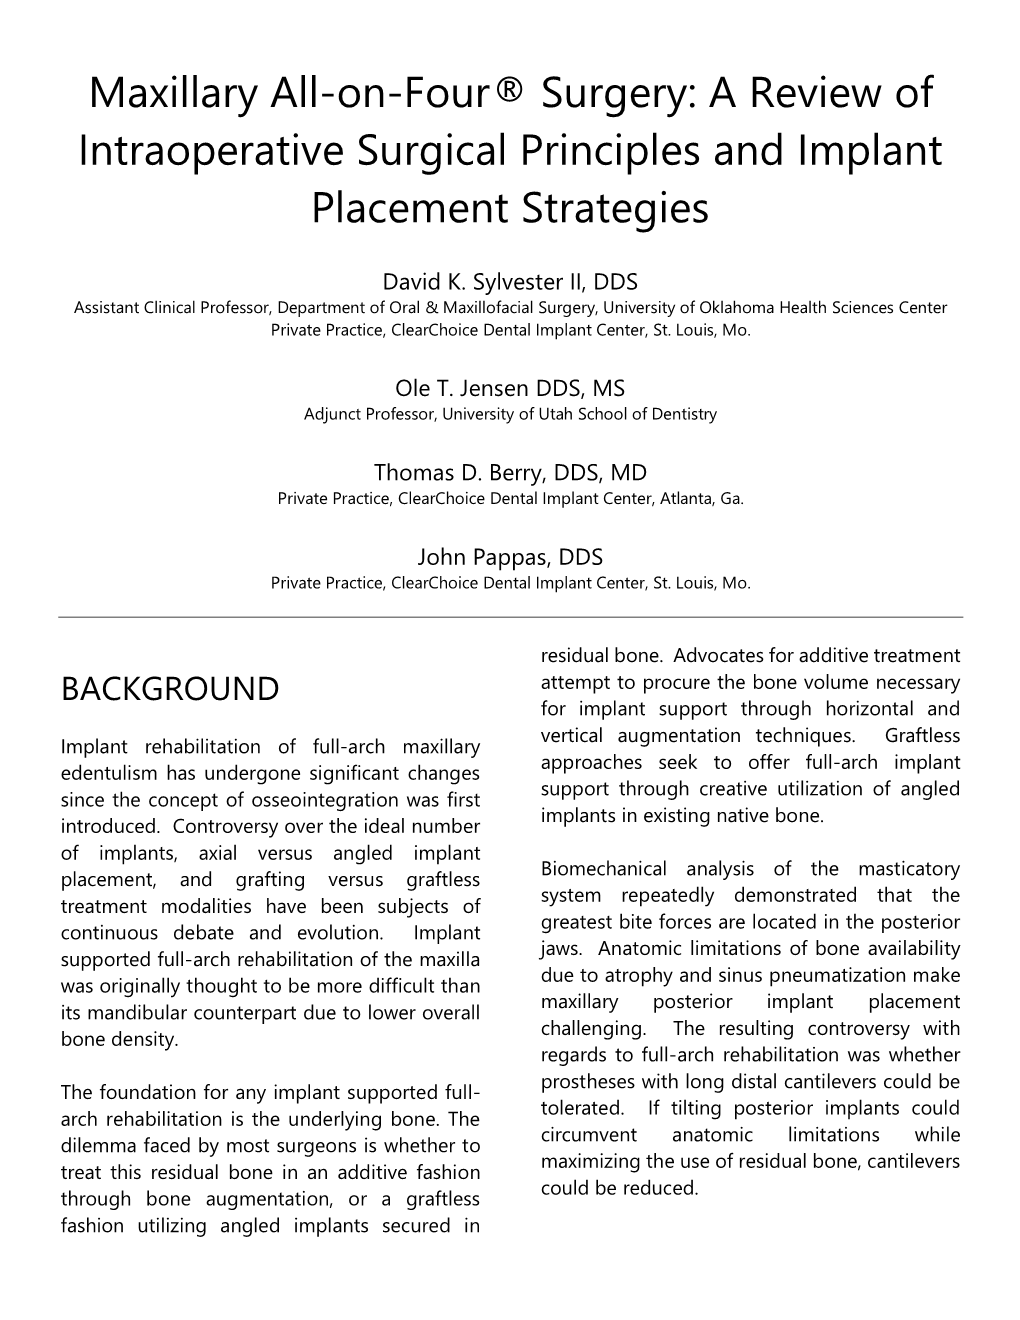 Maxillary All-On-Four® Surgery: a Review of Intraoperative Surgical Principles and Implant Placement Strategies